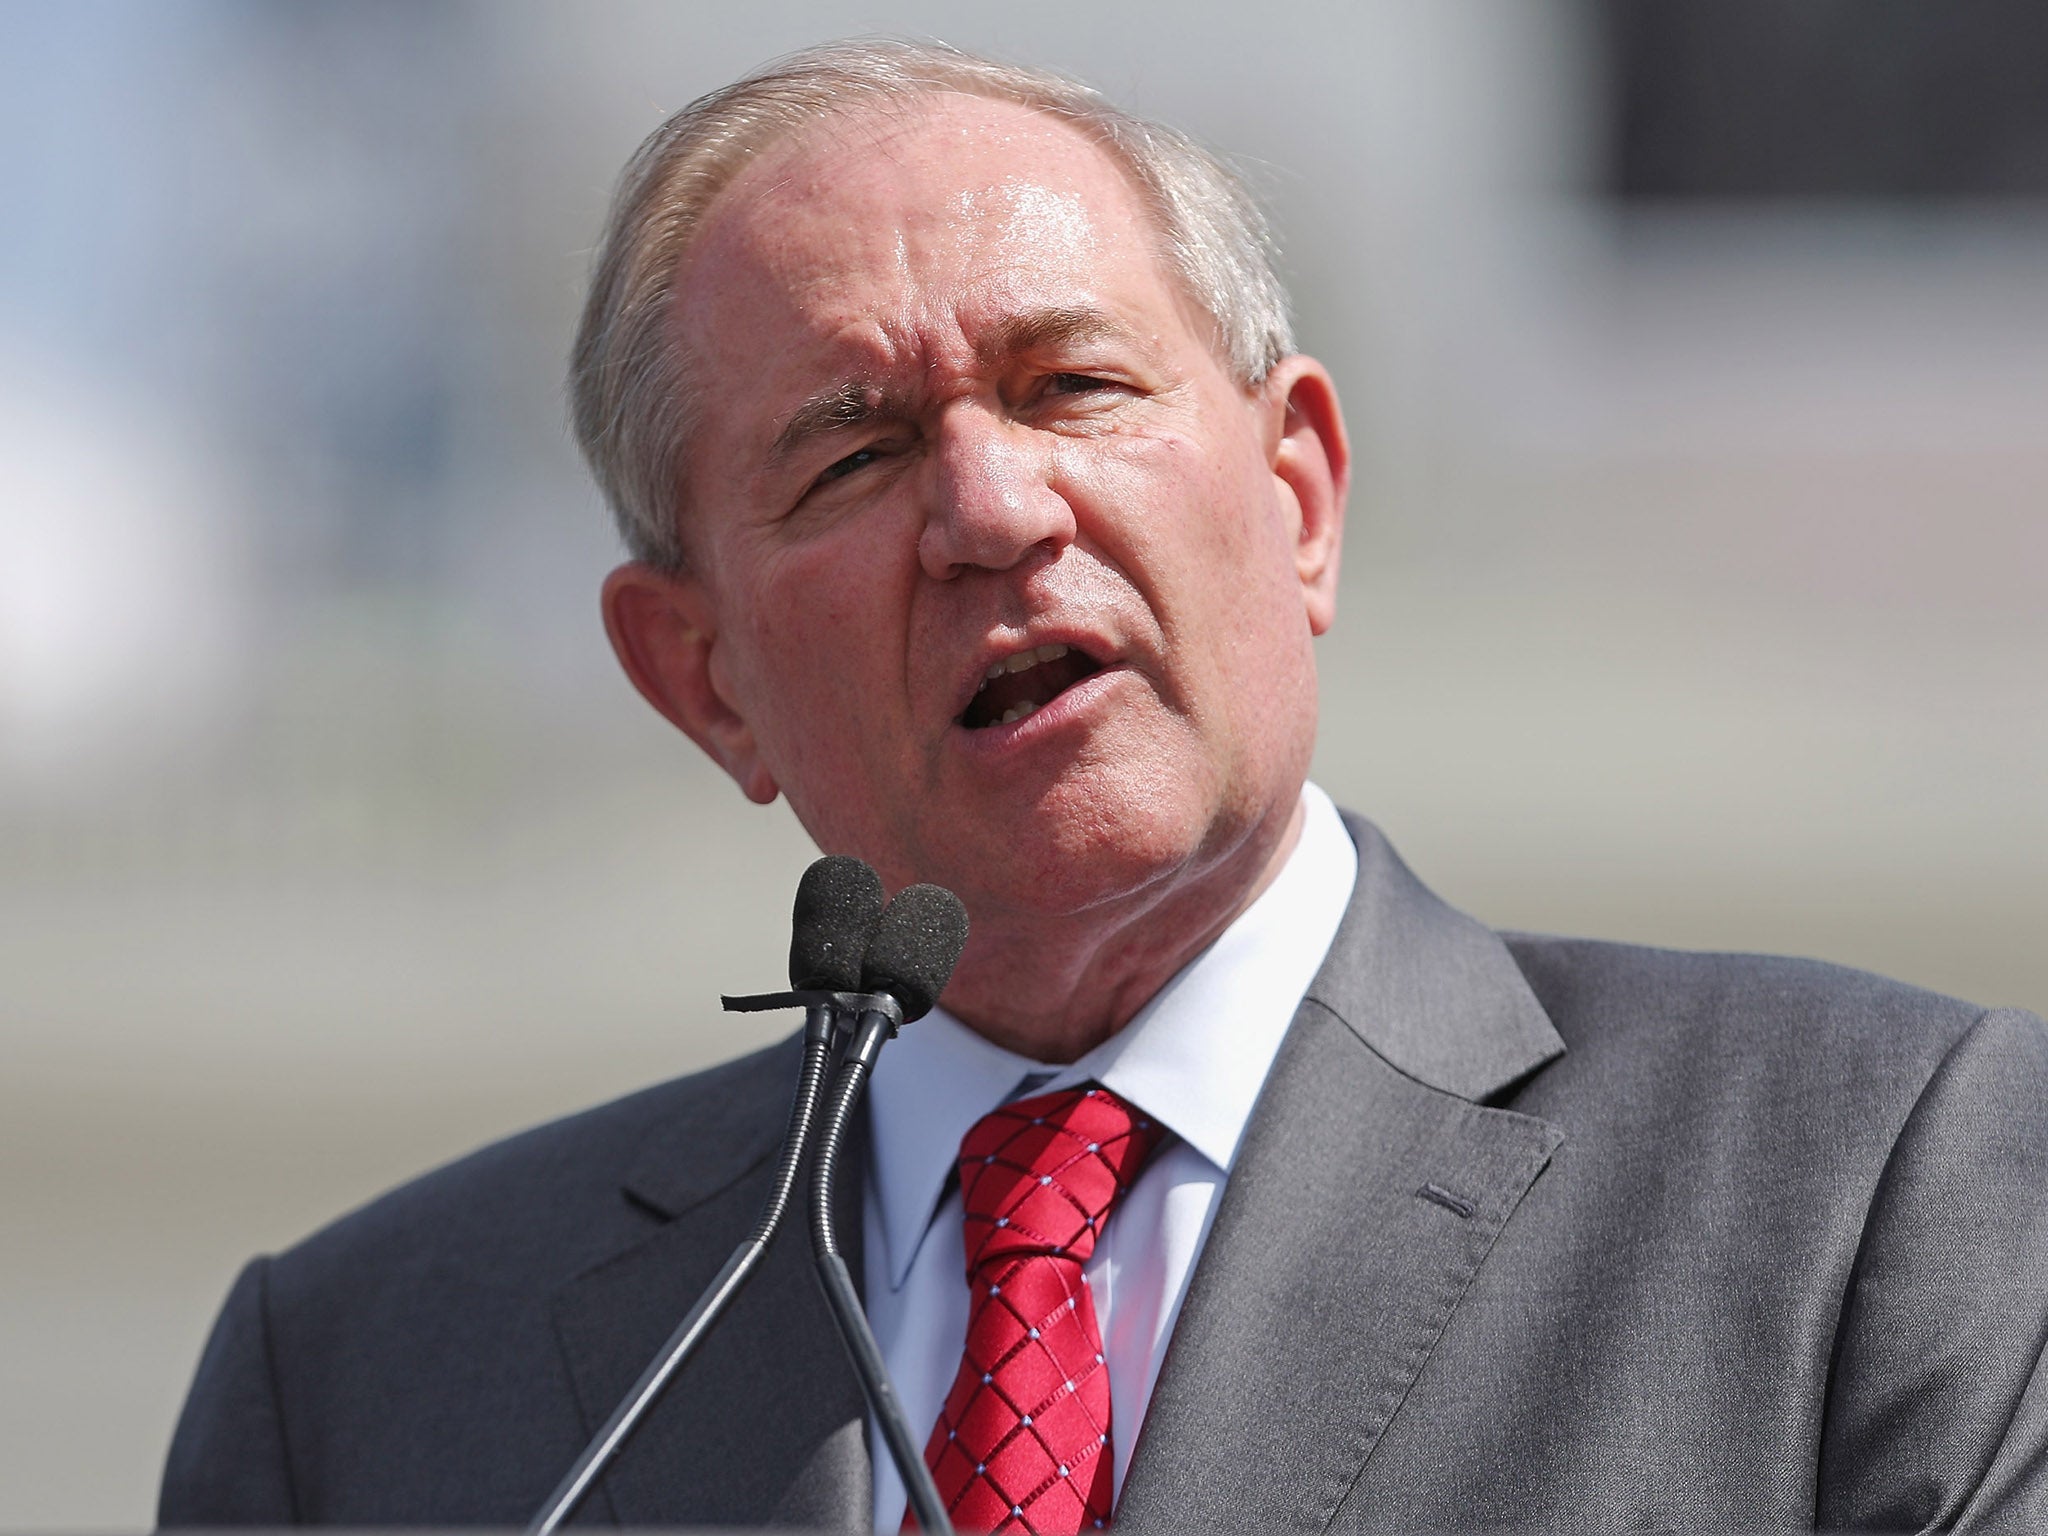 Former Virginia governor Jim Gilmore has suspended his campaign for President